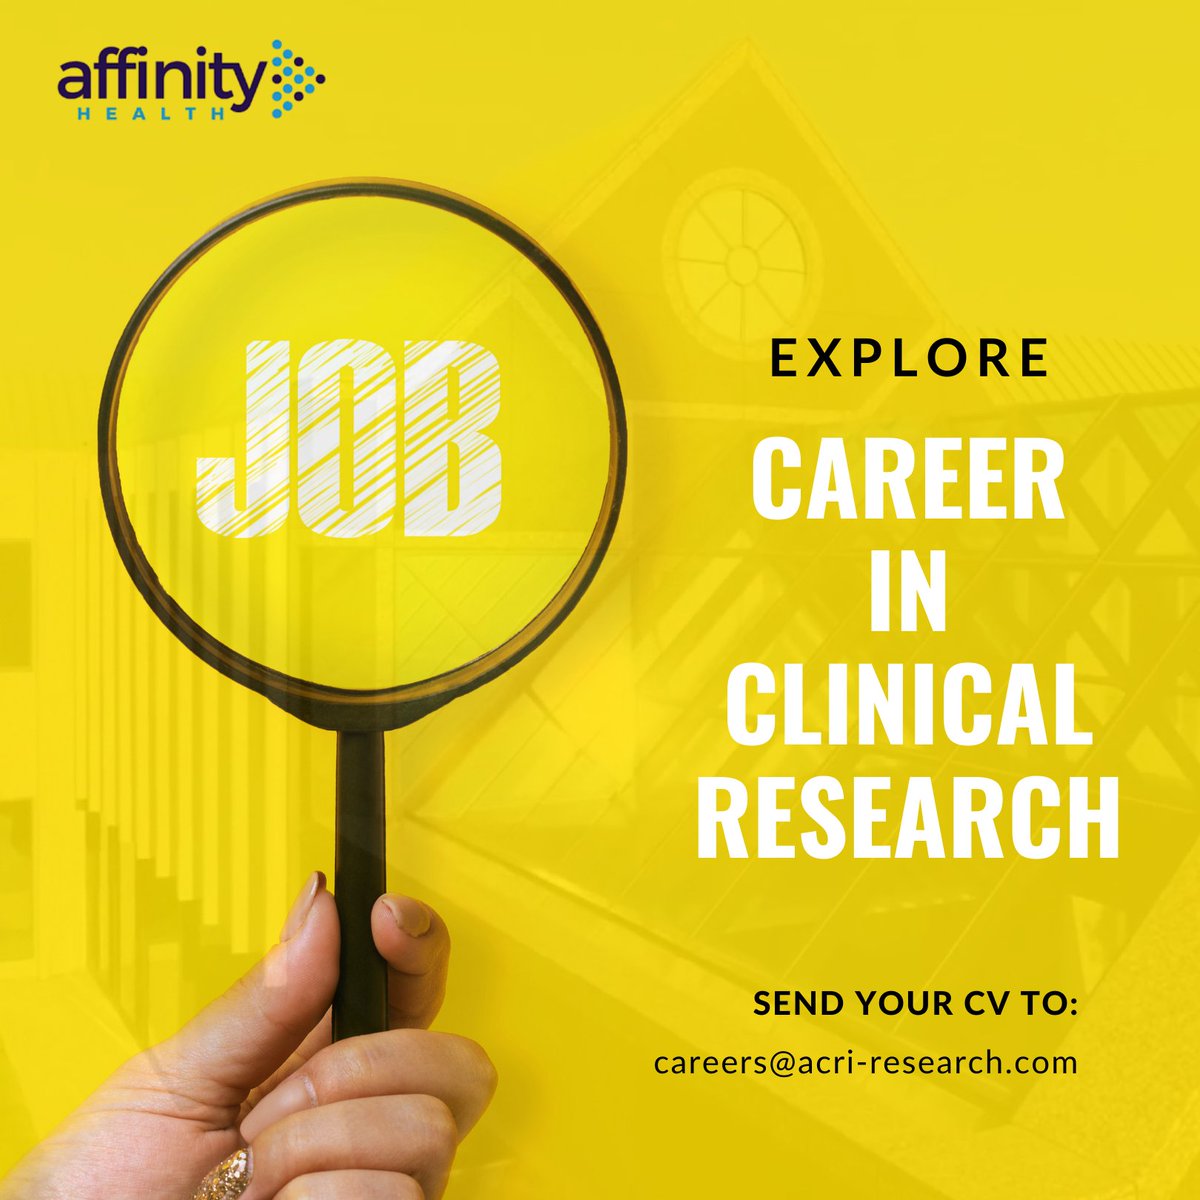 If you want to learn more about #careeropportunities at Affinity Health, please visit our website and contact us for more information.

Office: 630-491-1900
Website: affinityhealthcorp.com/careers/ 

#careerinresearch #clinicaltrials #affinityhealth #qualityhealthcare #healthcare